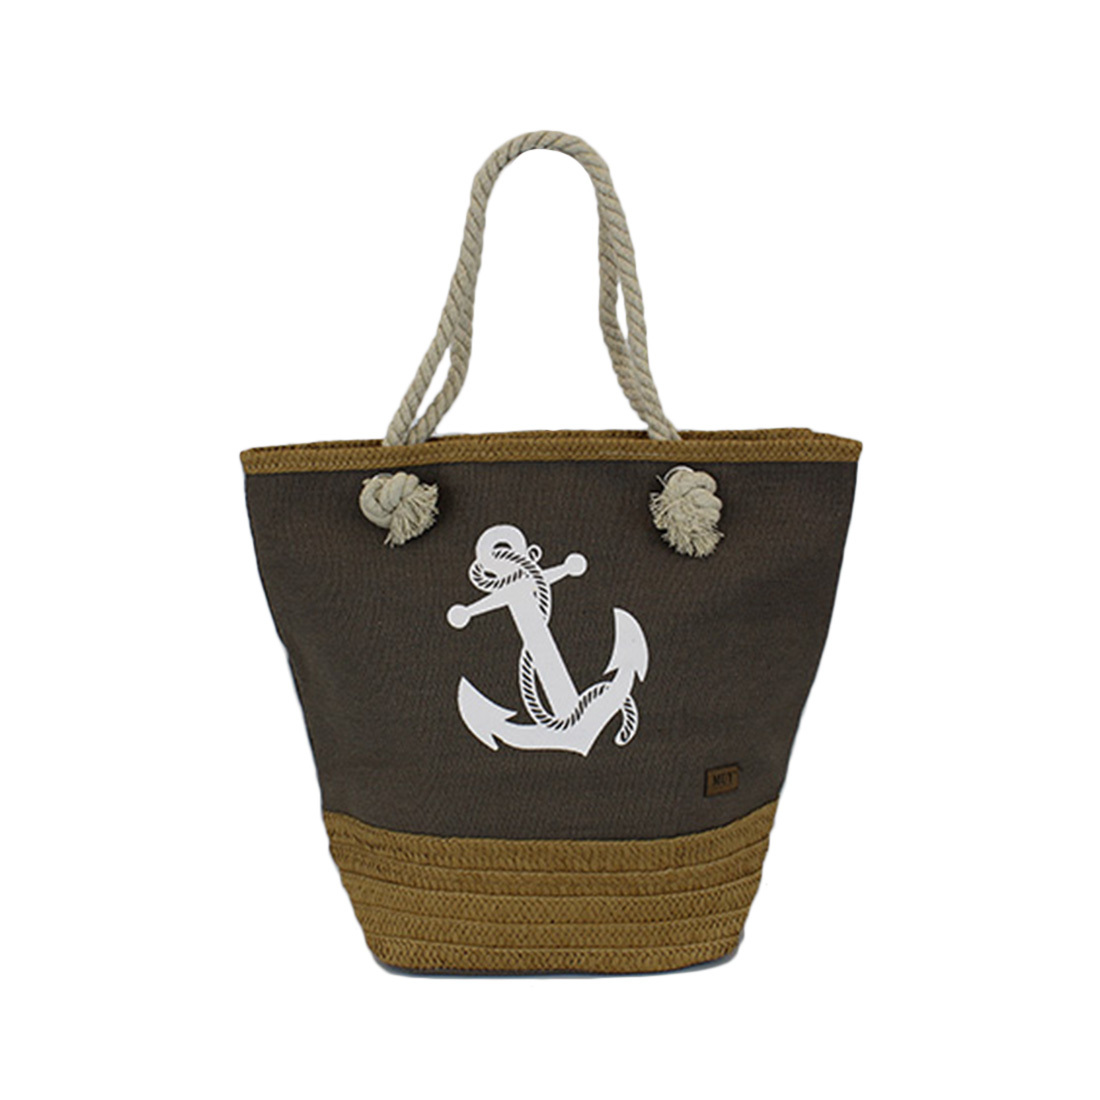 * Straw beach bags with anchor